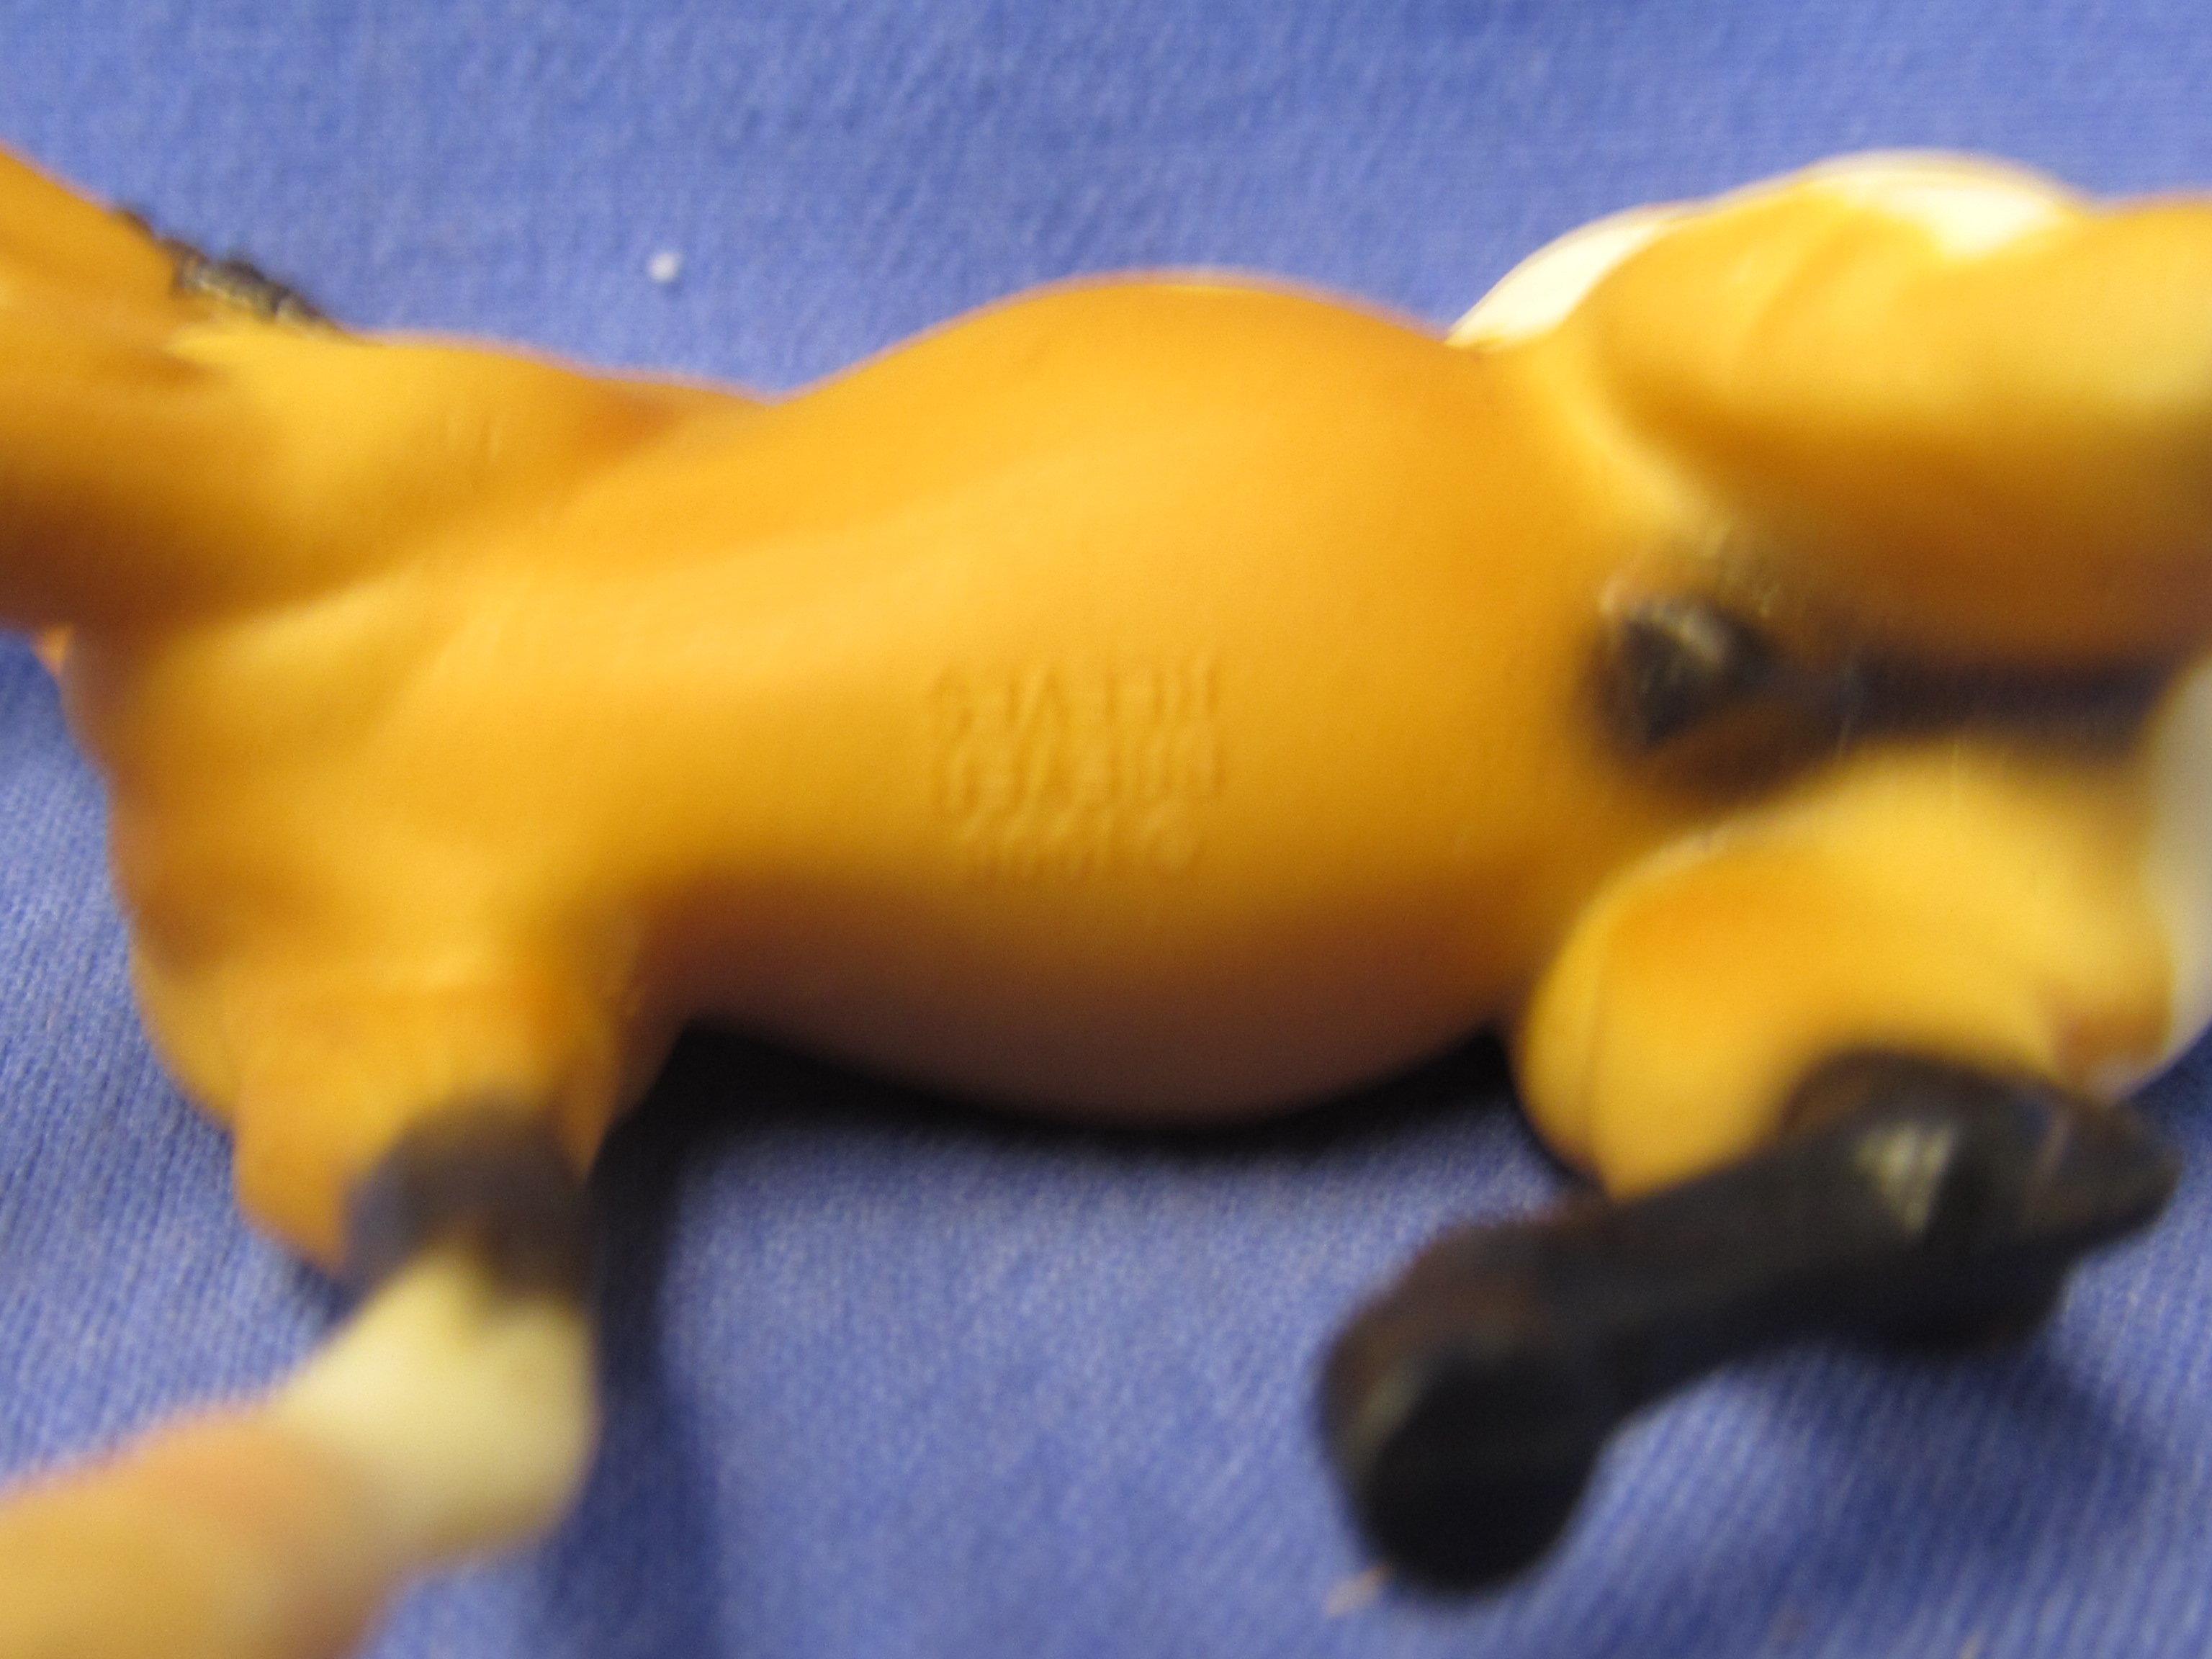 3 Miniature Breyer Horses – Overall Good-Very Good Condition 3”, 2 3/4” & 2” Tall – As in Photos